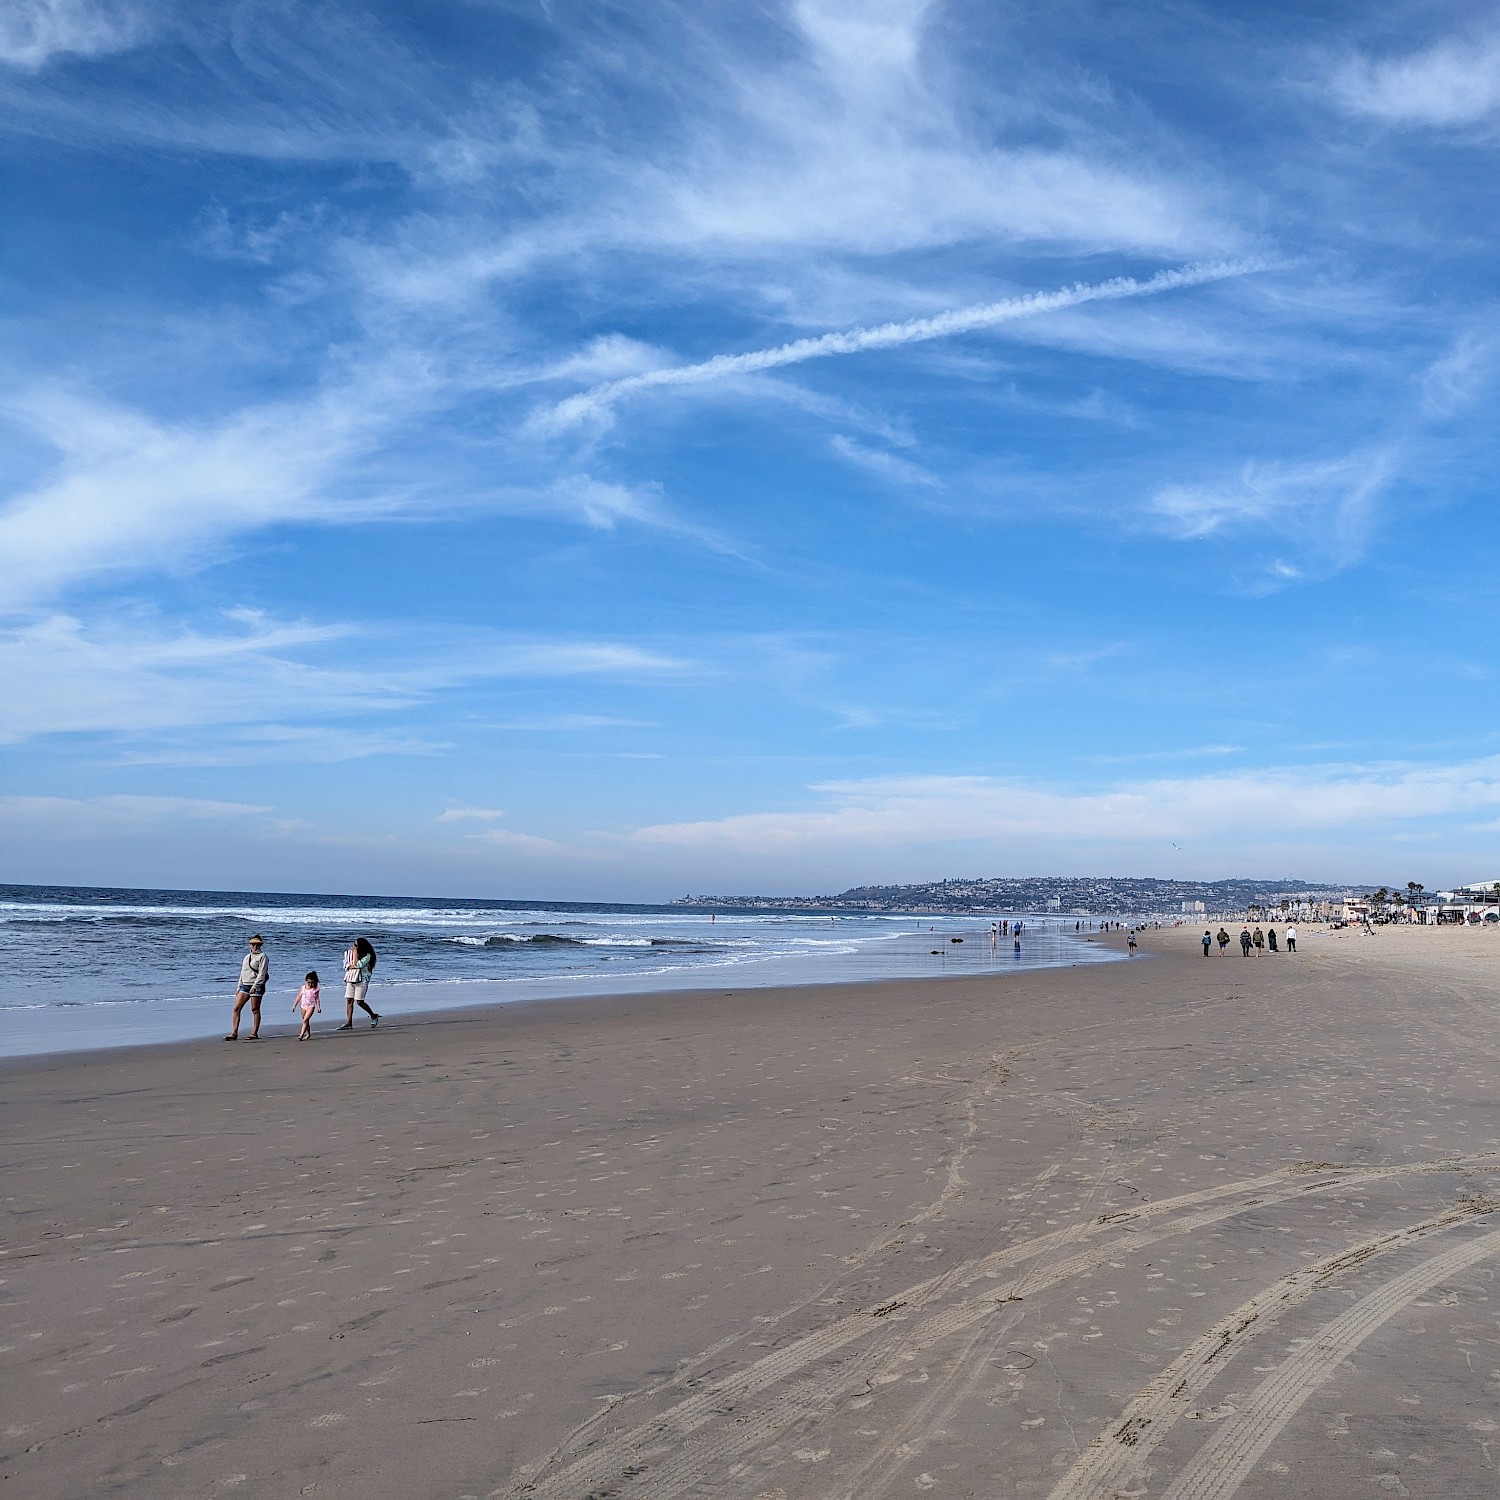 A view looking down the beach with bright blue sky and whispy clouds. Ocean on the left, beach on the right, and people walking